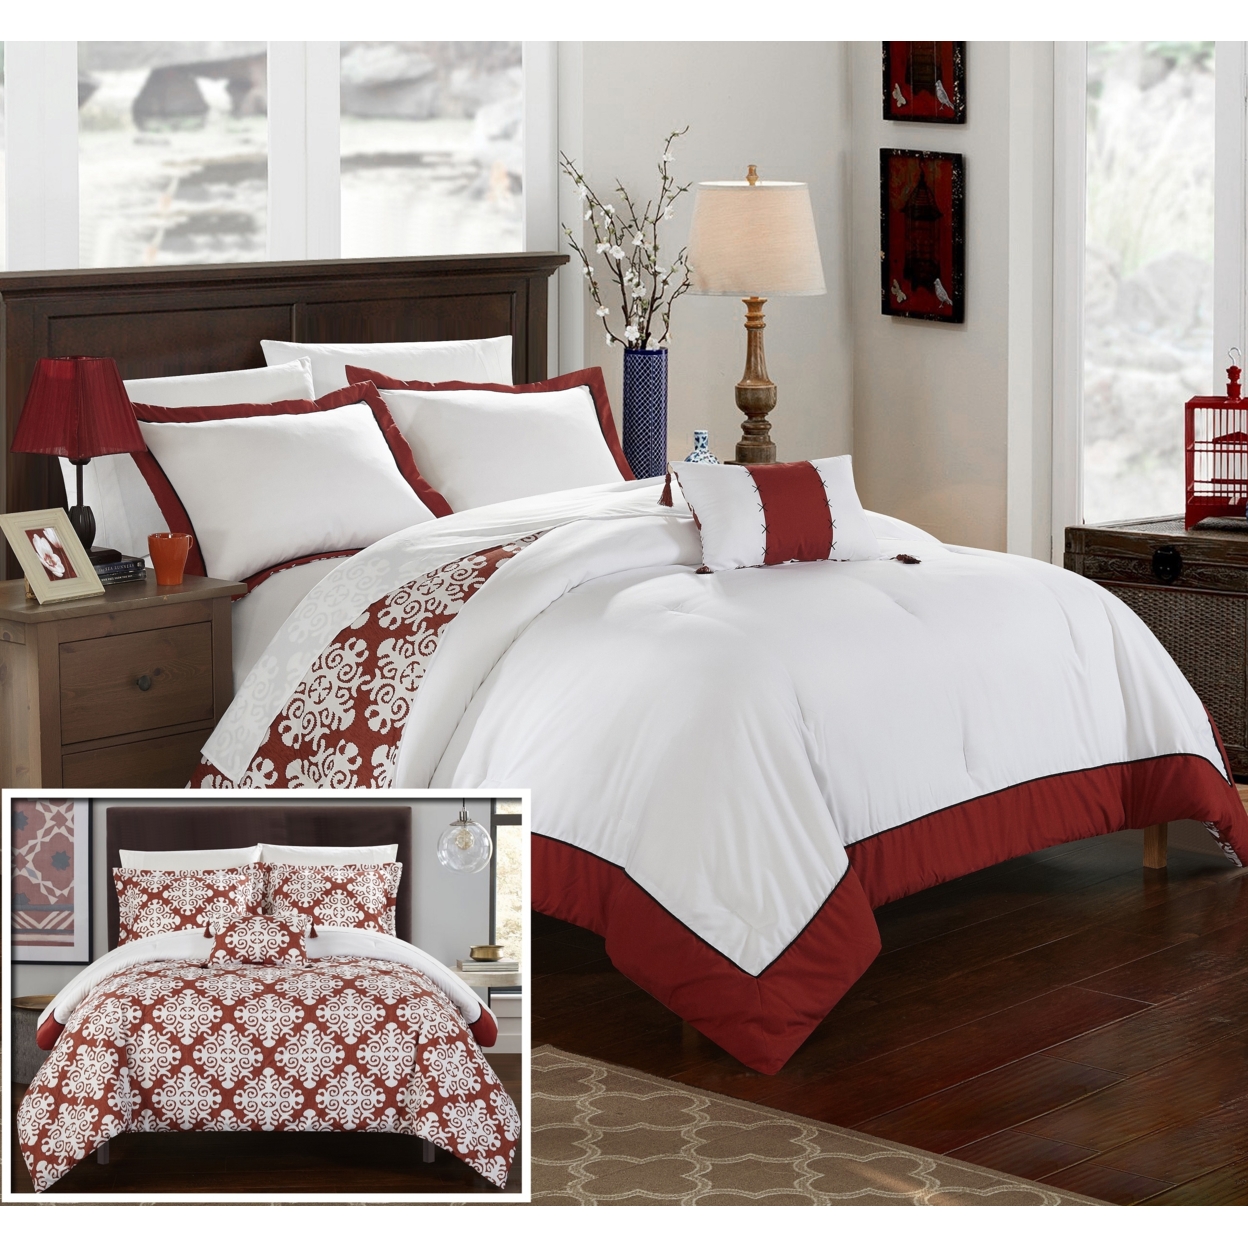 Chic Home 8 Piece Mallow Black And White REVERSIBLE Medallion Printed PLUSH Hotel Collection Bed In A Bag Duvet Set With Sheet Set - Marsala